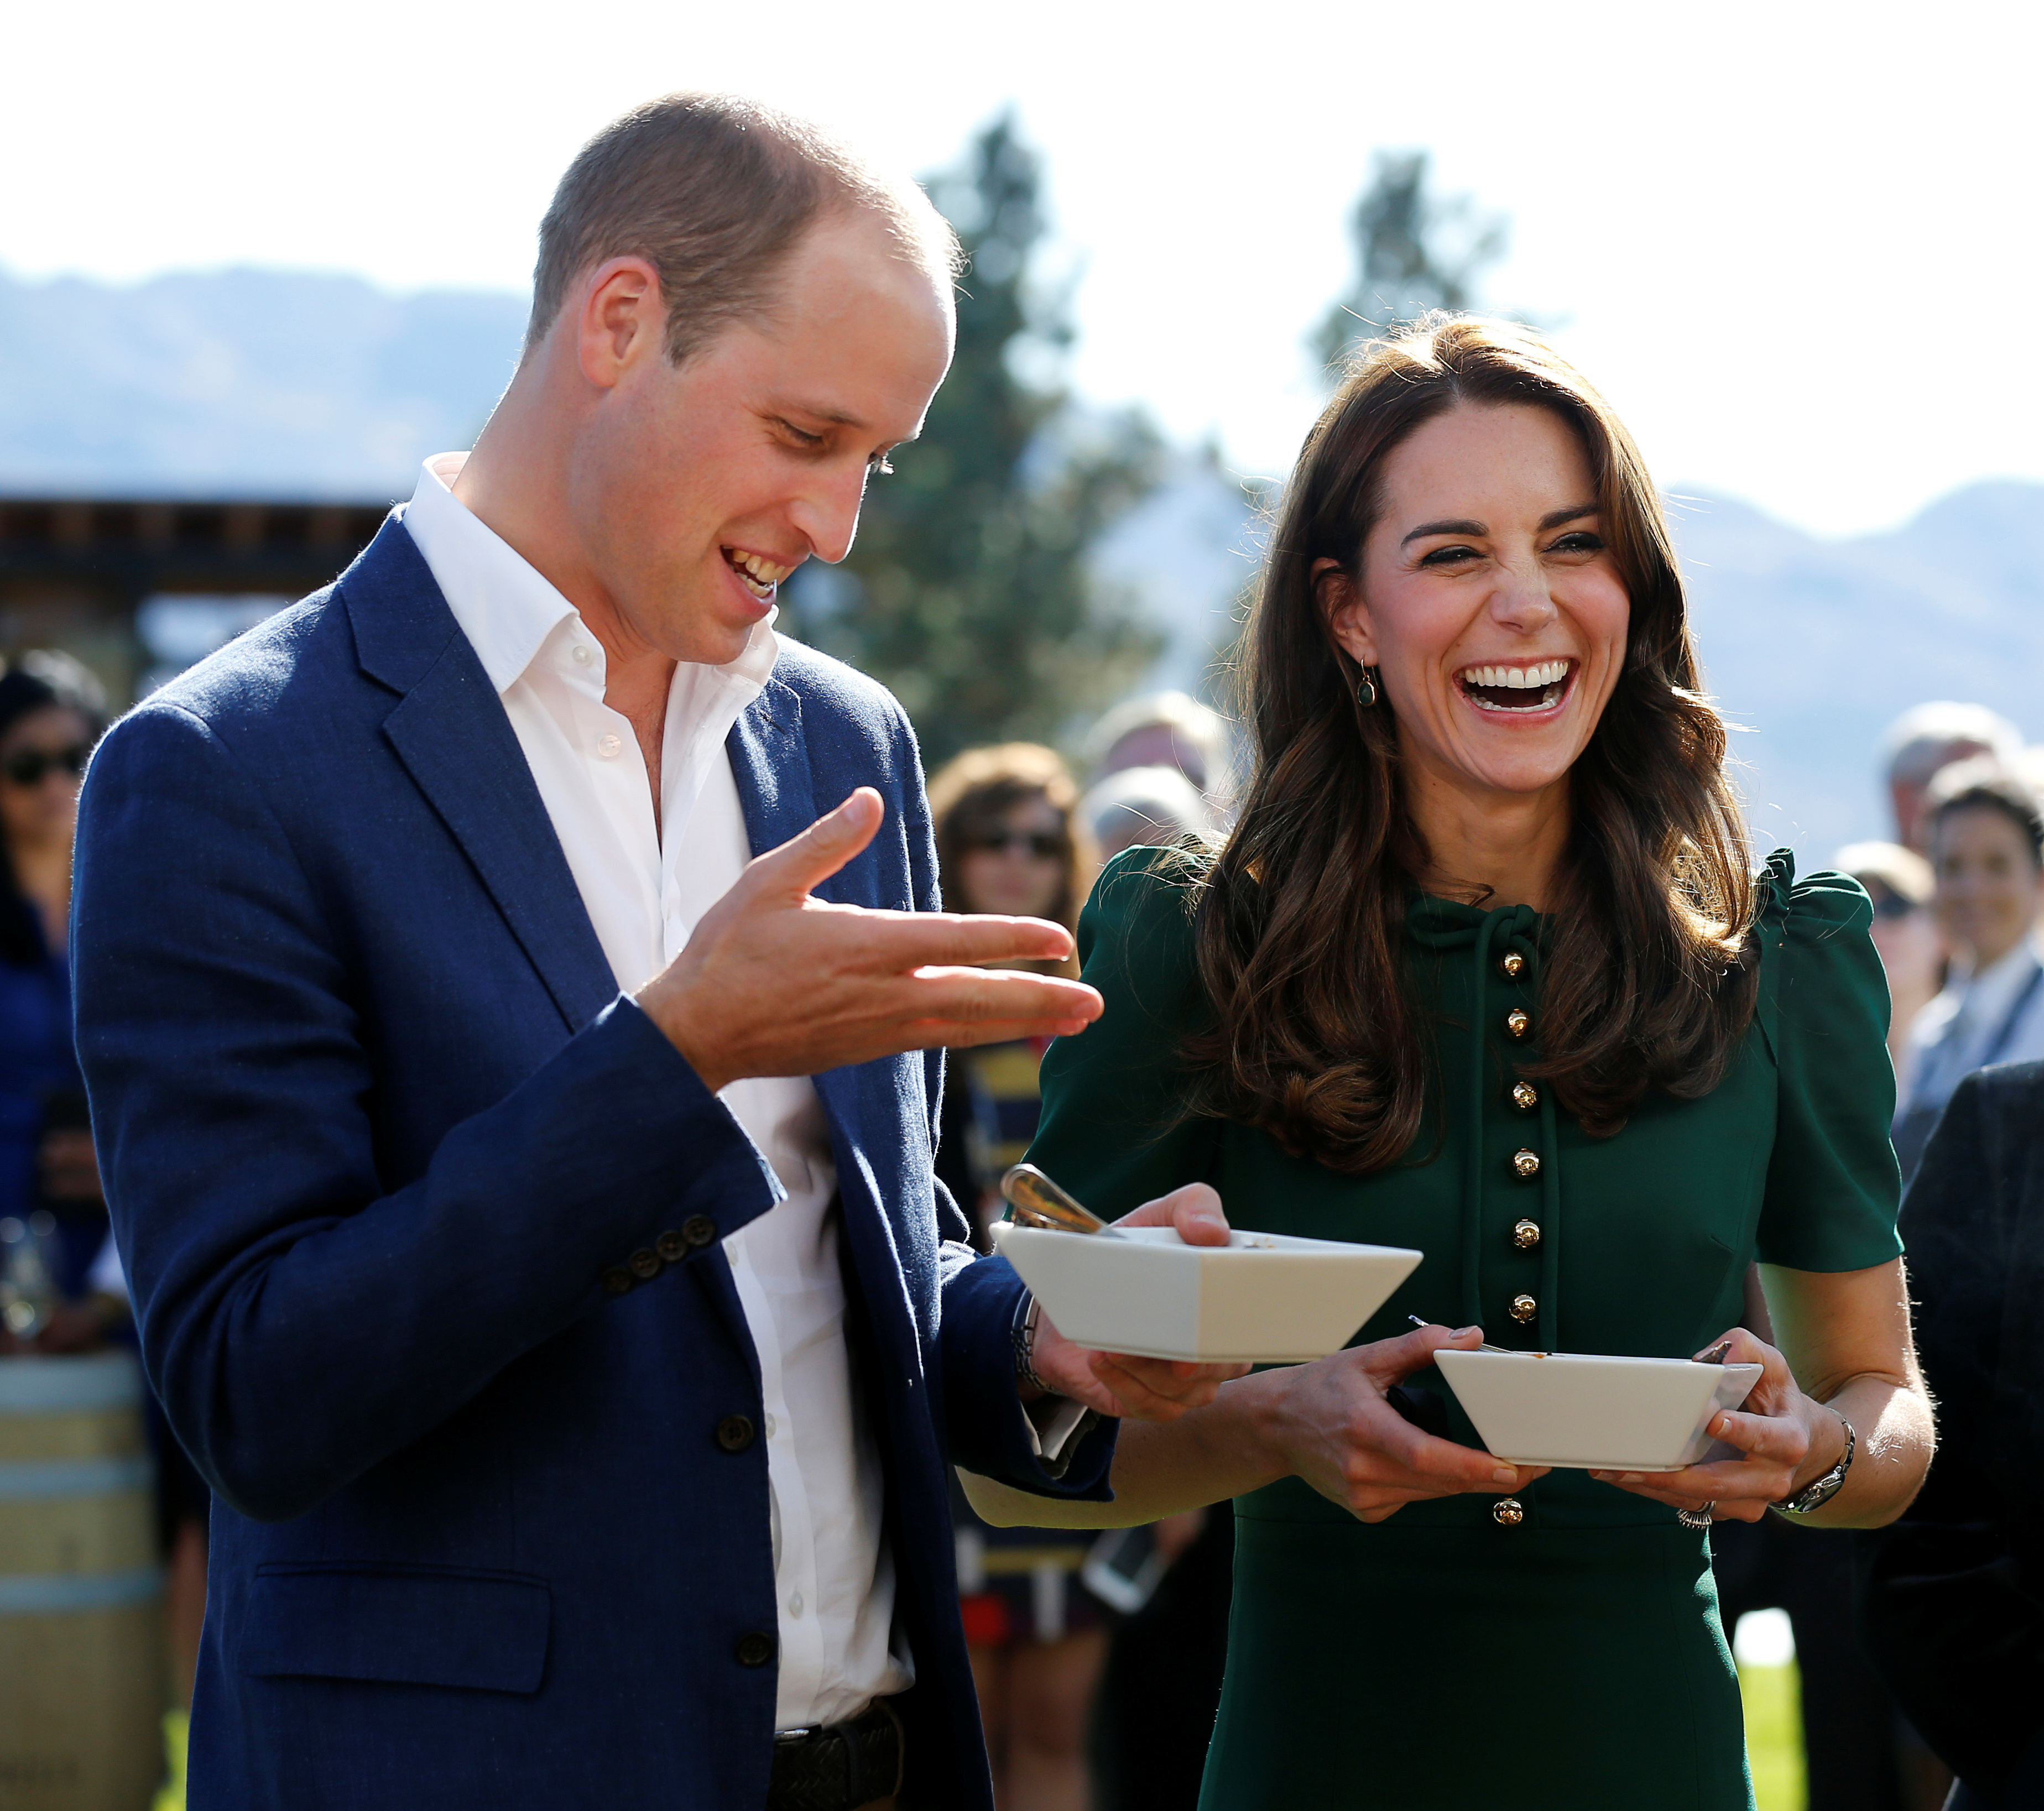 Britain's Prince William and Catherine, Duchess of Cambridge, react while sampling food during the Taste of British Columbia event at Mission Hill winery in Kelowna, British Columbia, Canada, September 27, 2016. REUTERS/Chris Wattie - S1BEUDUDFLAA